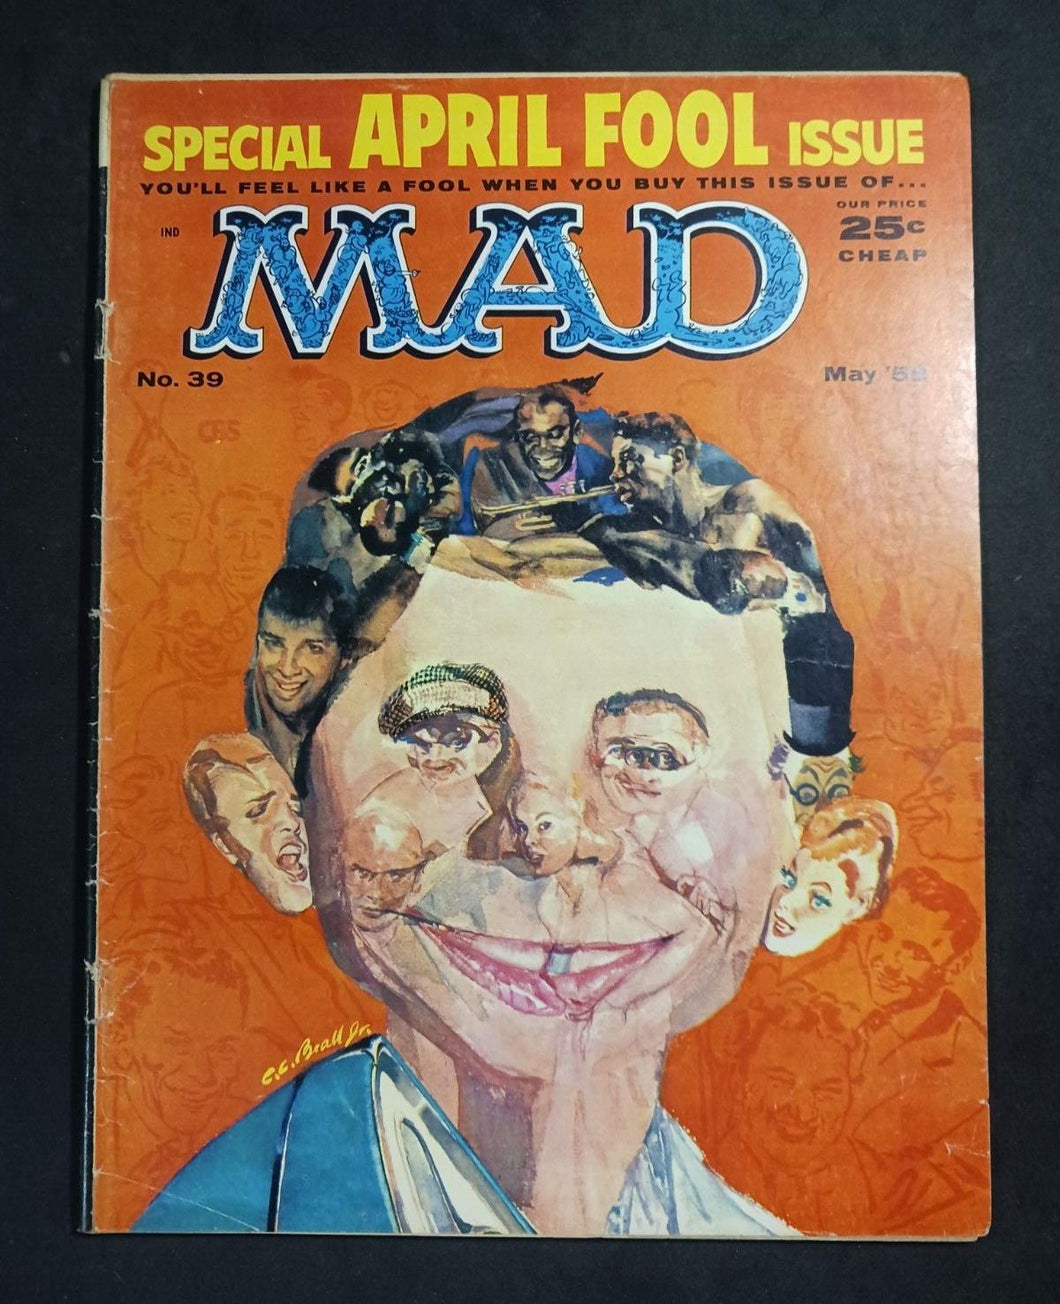 MAD Magazine #39 (May 1958) - Special April Fool Issue, VG 4.0